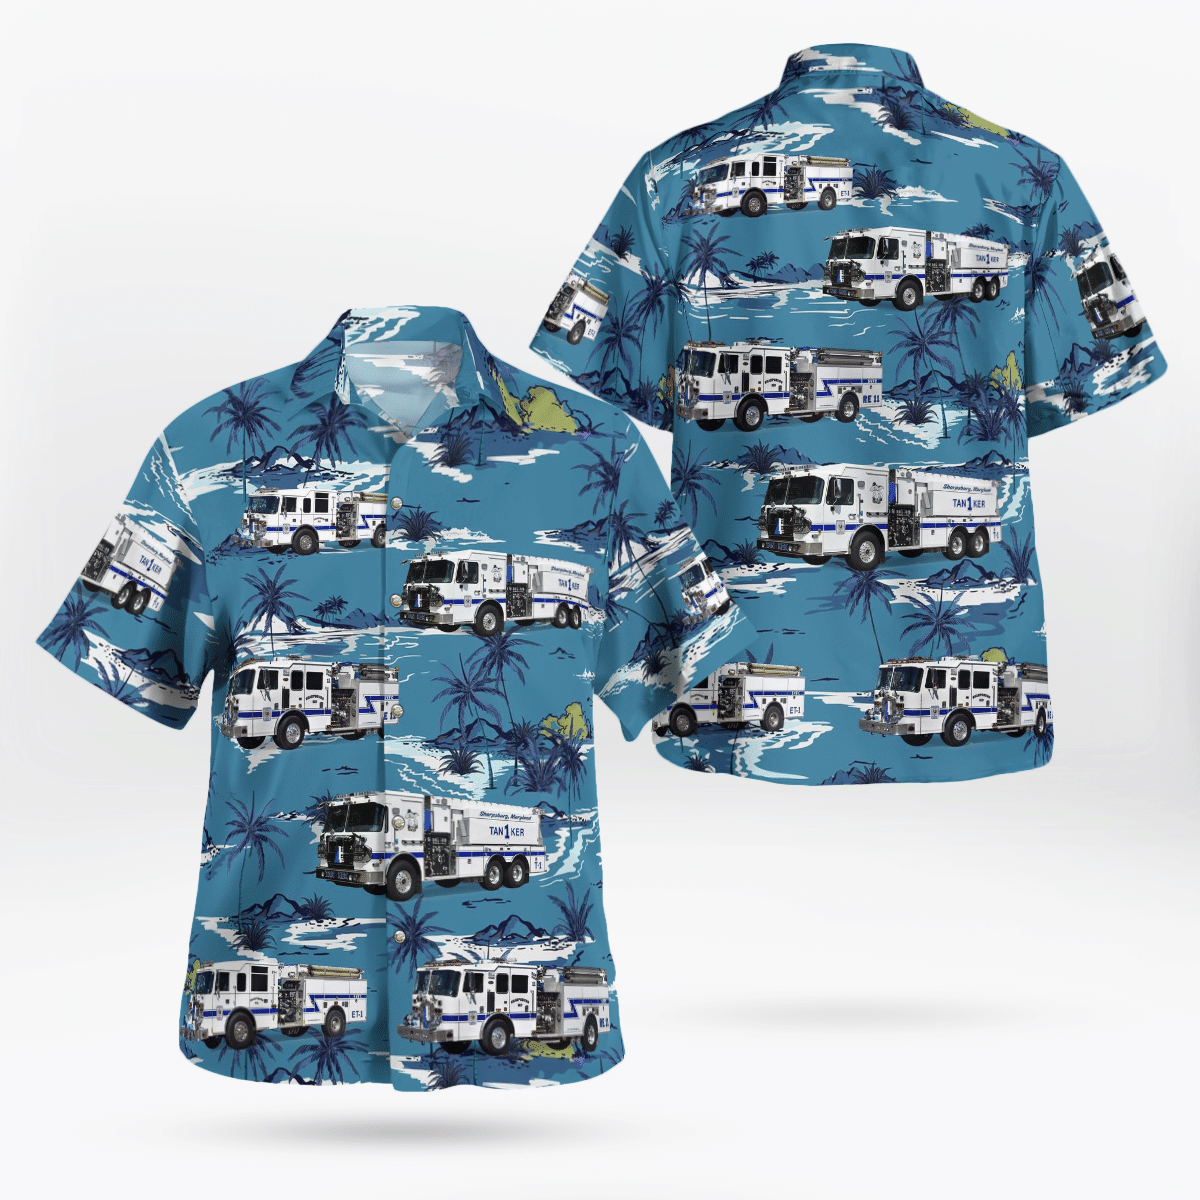 If you are in need of a new summertime look, pick up this Hawaiian shirt 187